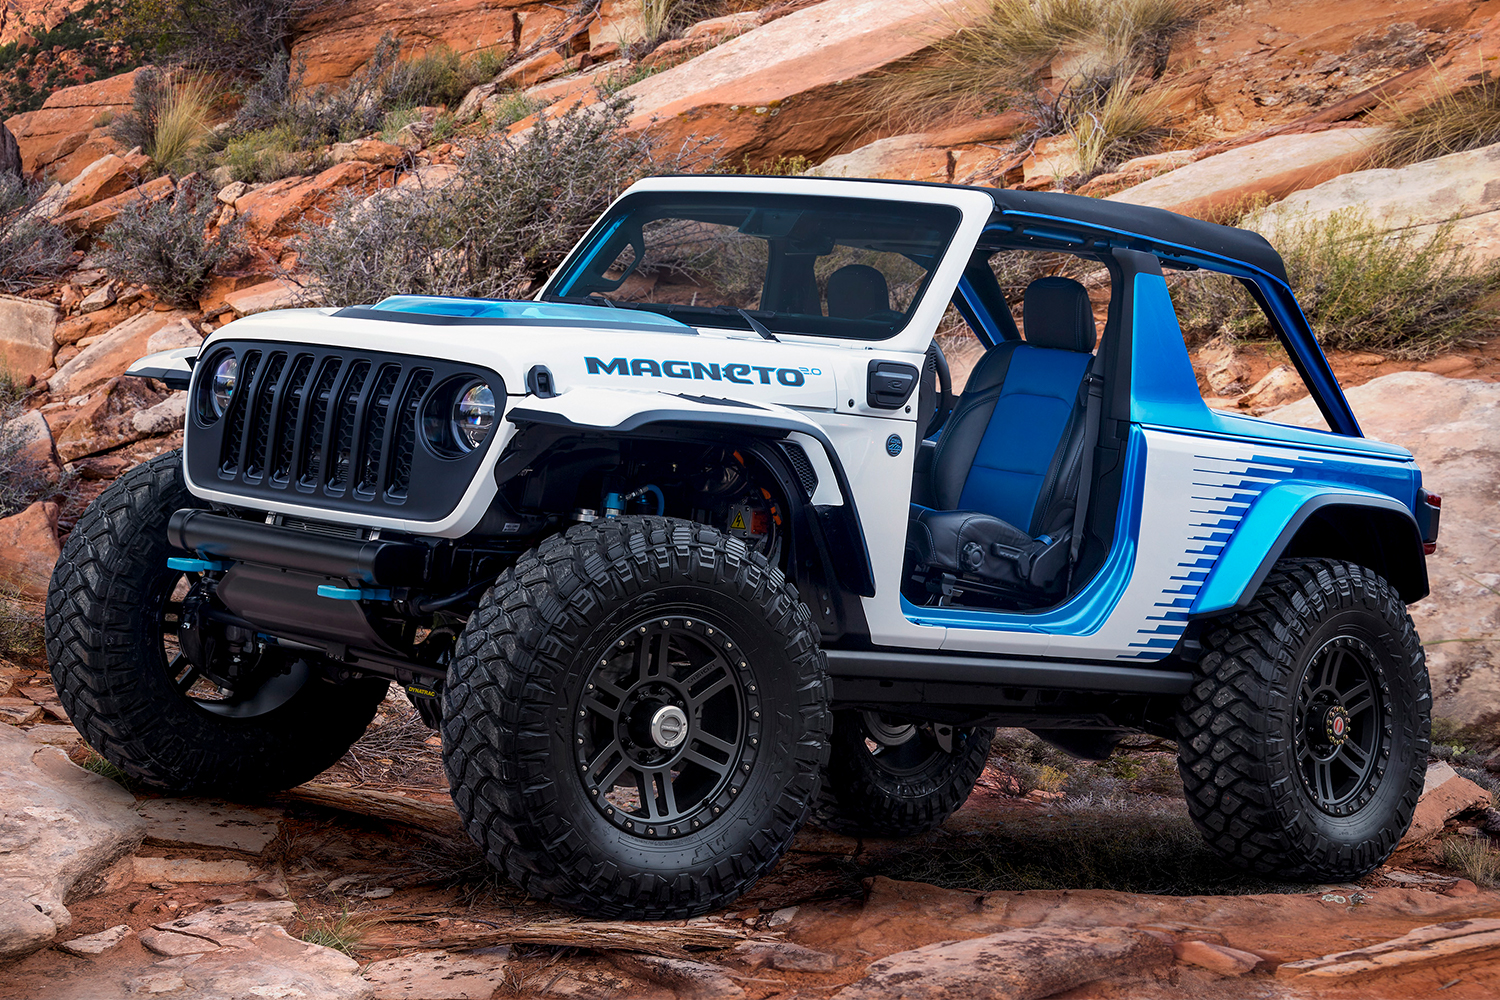 Jeep Built a MindBlowing Electric Wrangler, But You’ll Never Get One